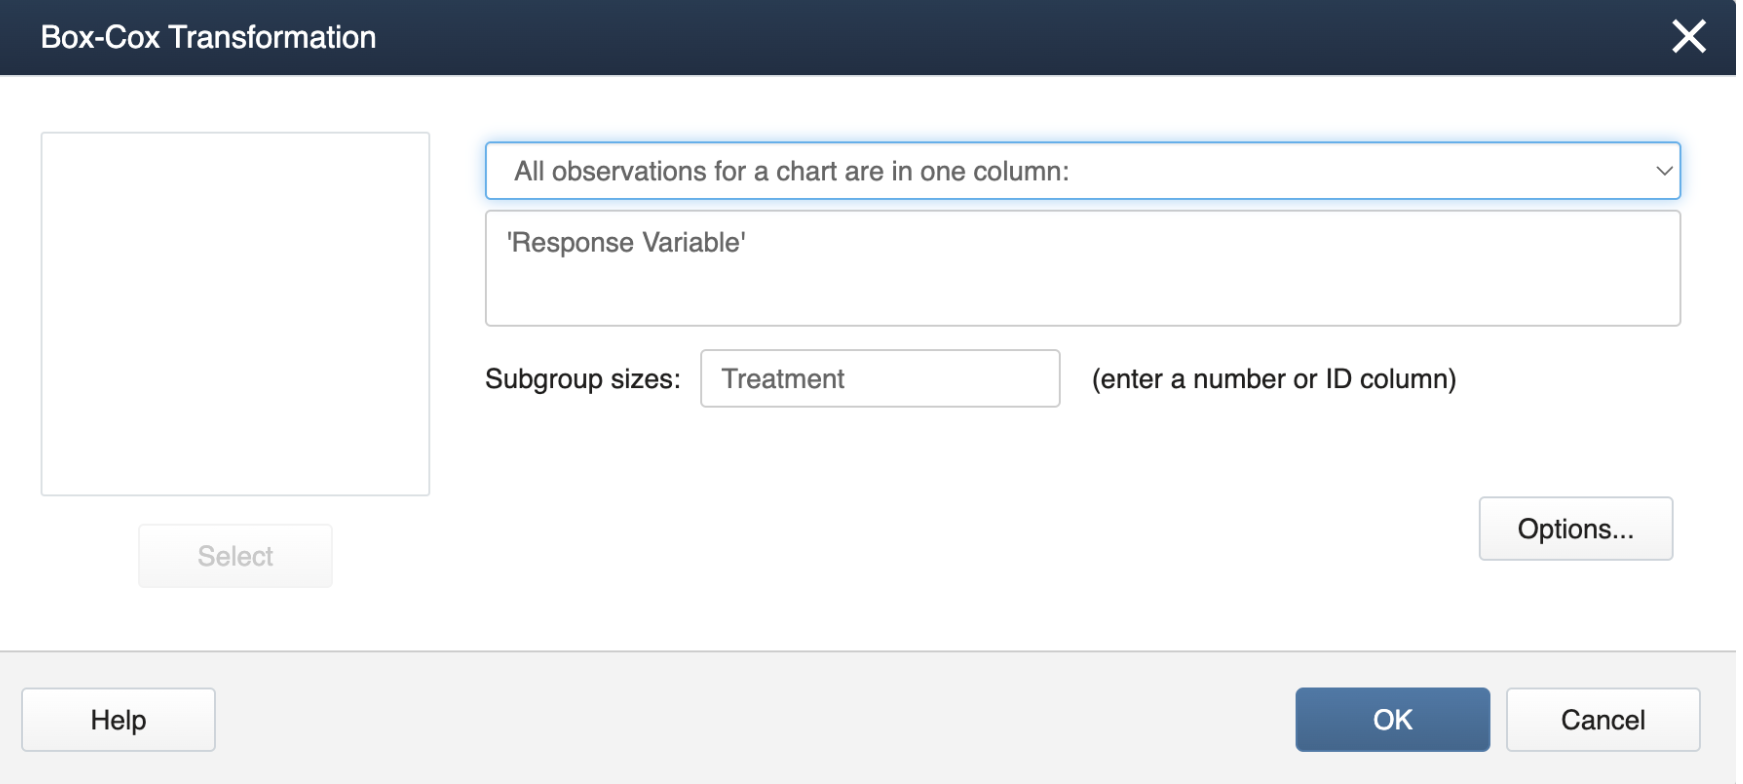 Entering "Response Variable" and "Treatment" in the Box-Cox Transformation window.